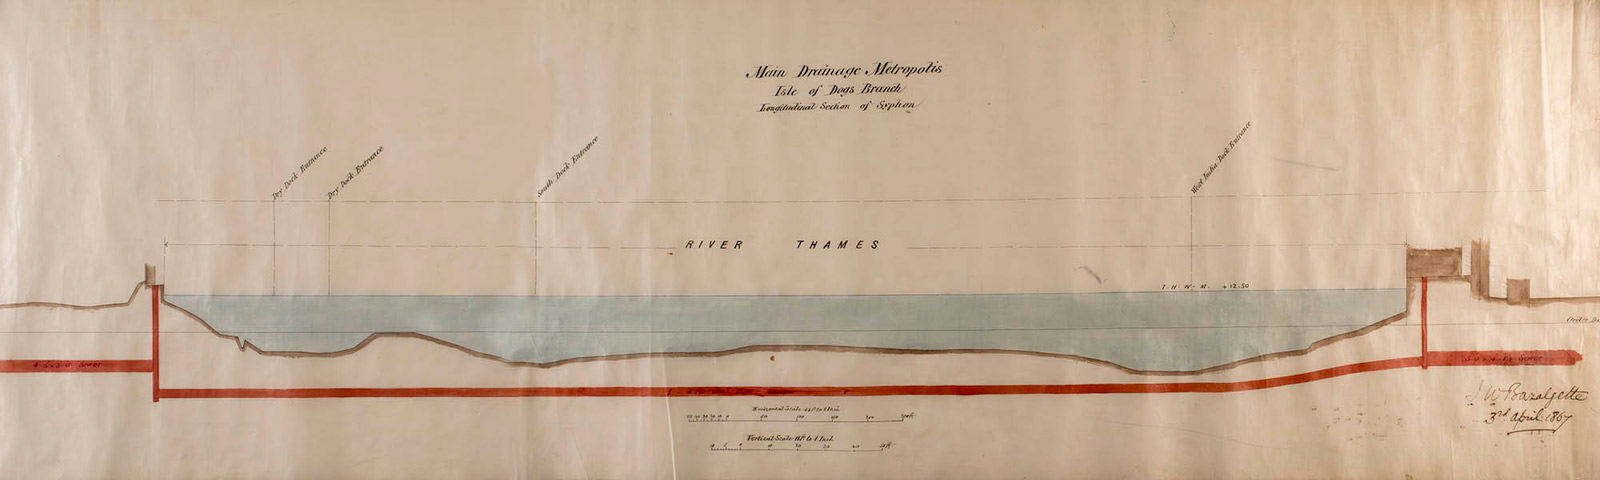 Several sections and cross-sections showing sewers and pipes. Signed by Bazalgette
